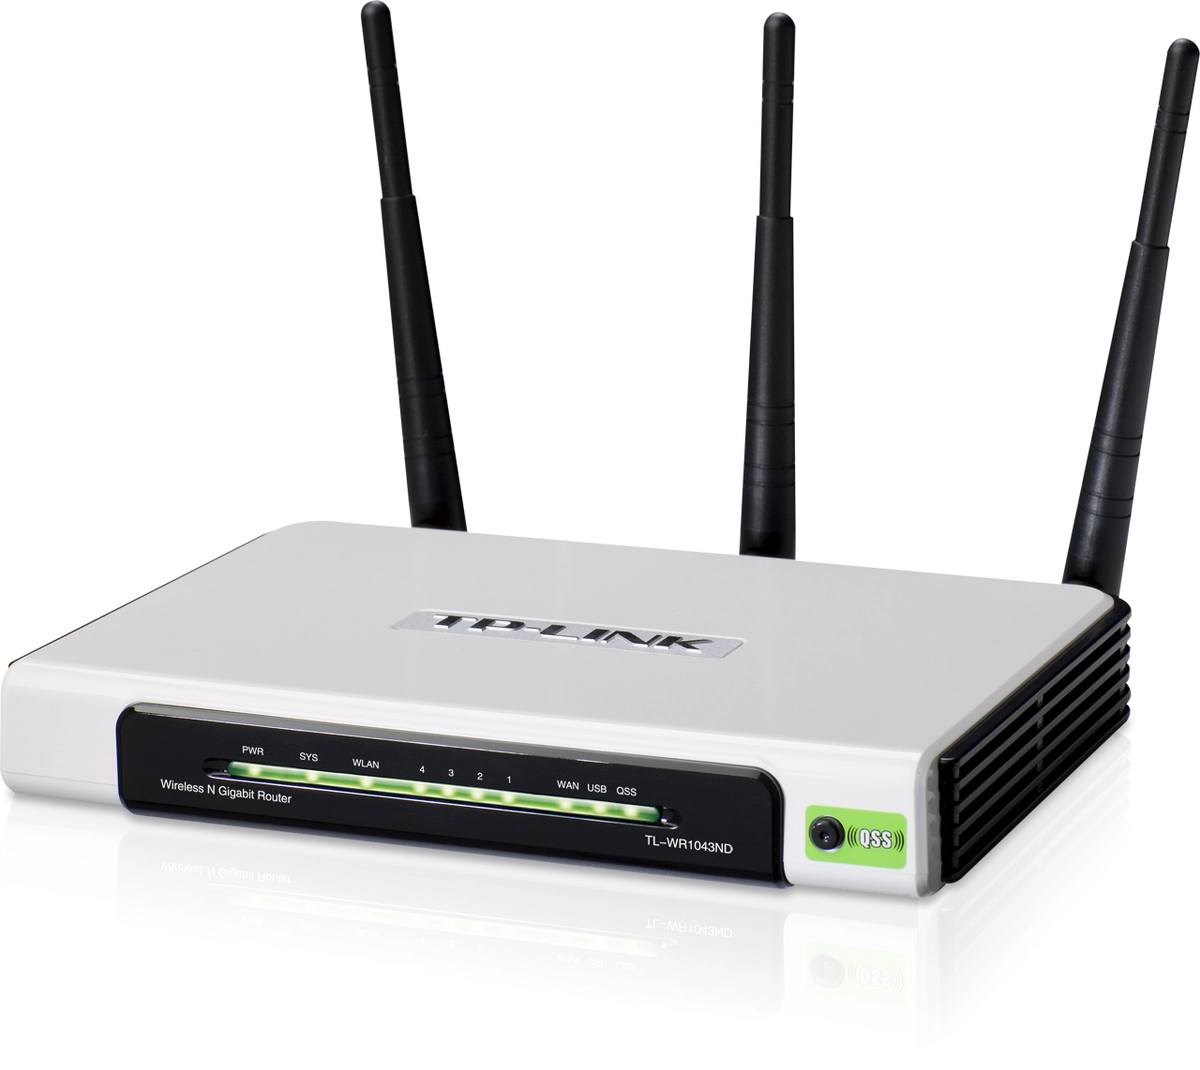 number Exactly hostage Everything About the TP-Link TL-WR1043ND Router